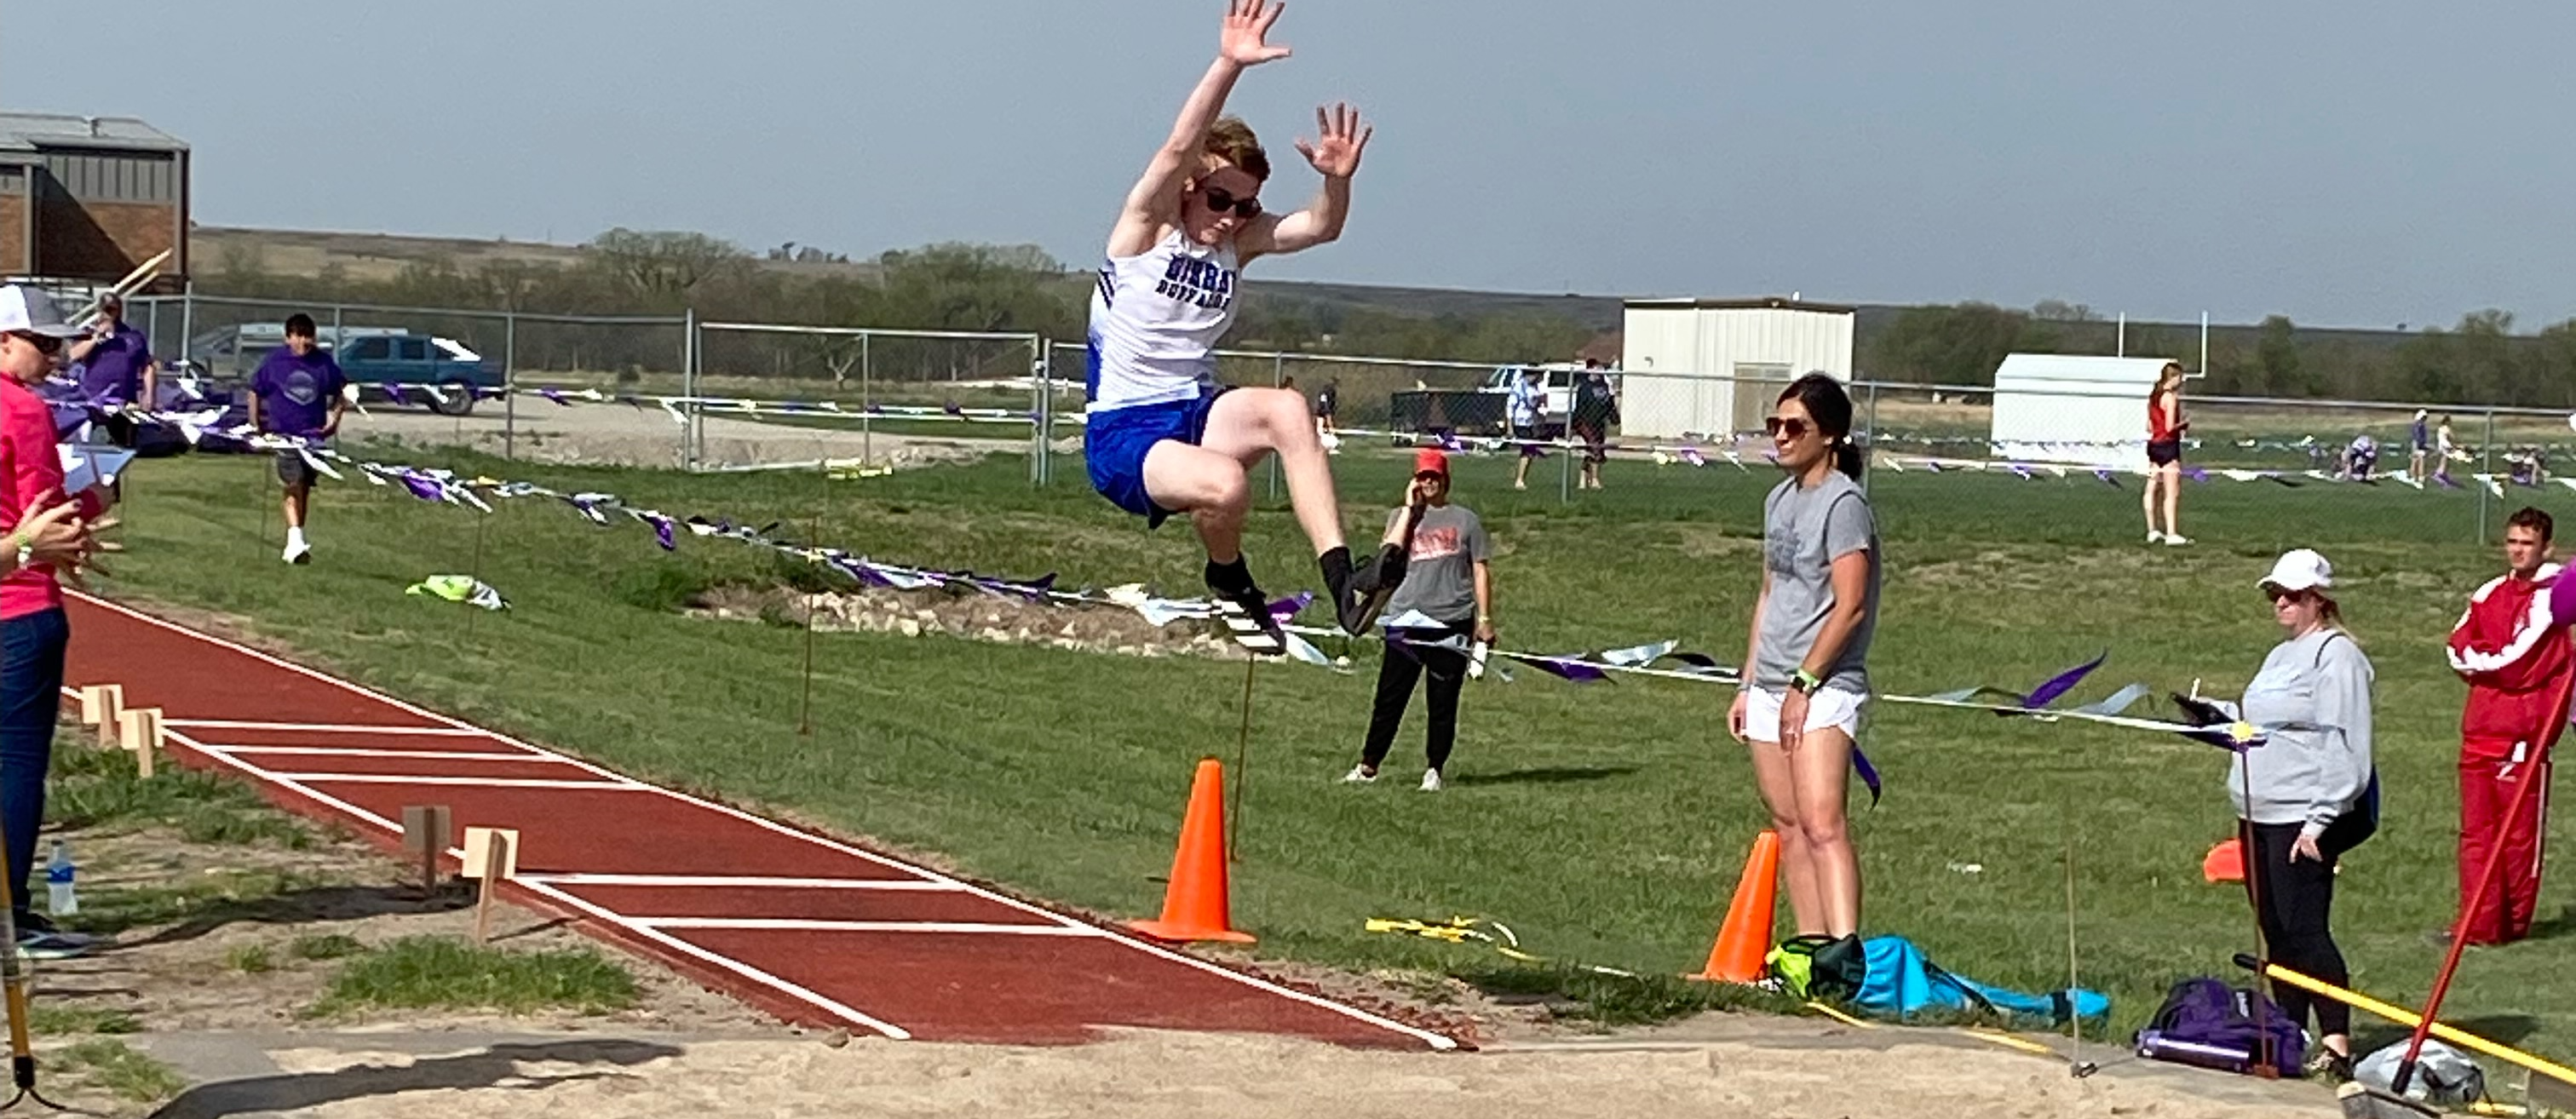 District Track - Long Jump